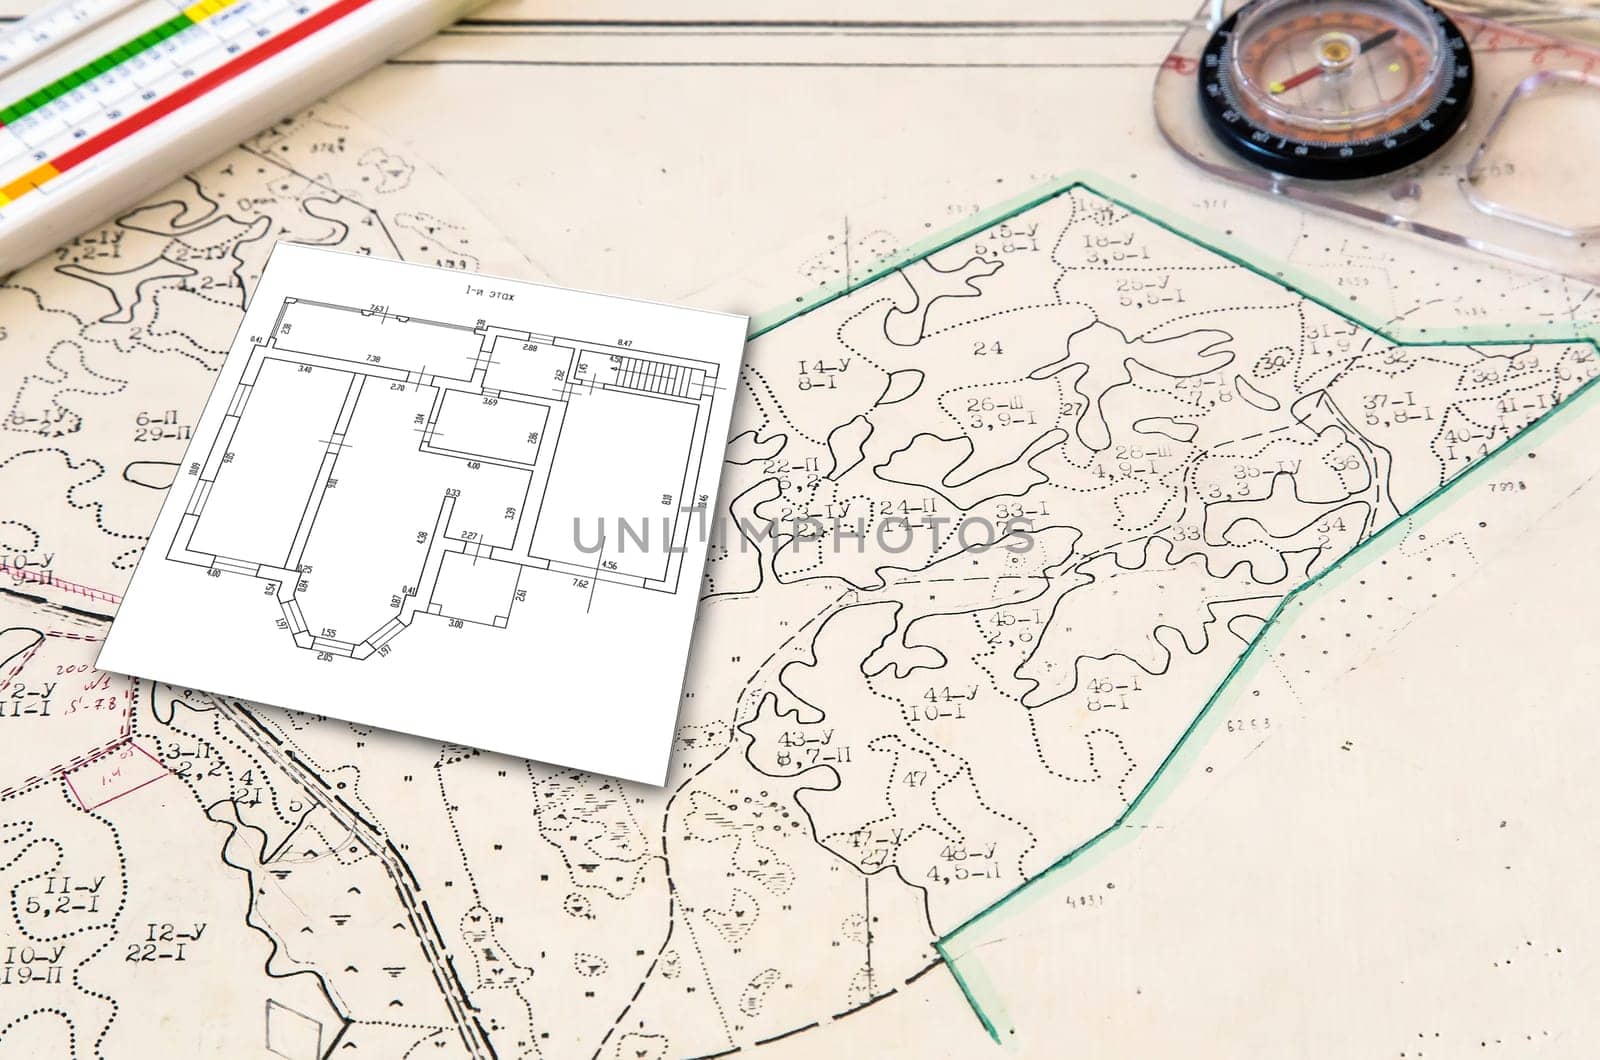 House design and plan of the land plot on the map. Near lie tools: compass, ruler.